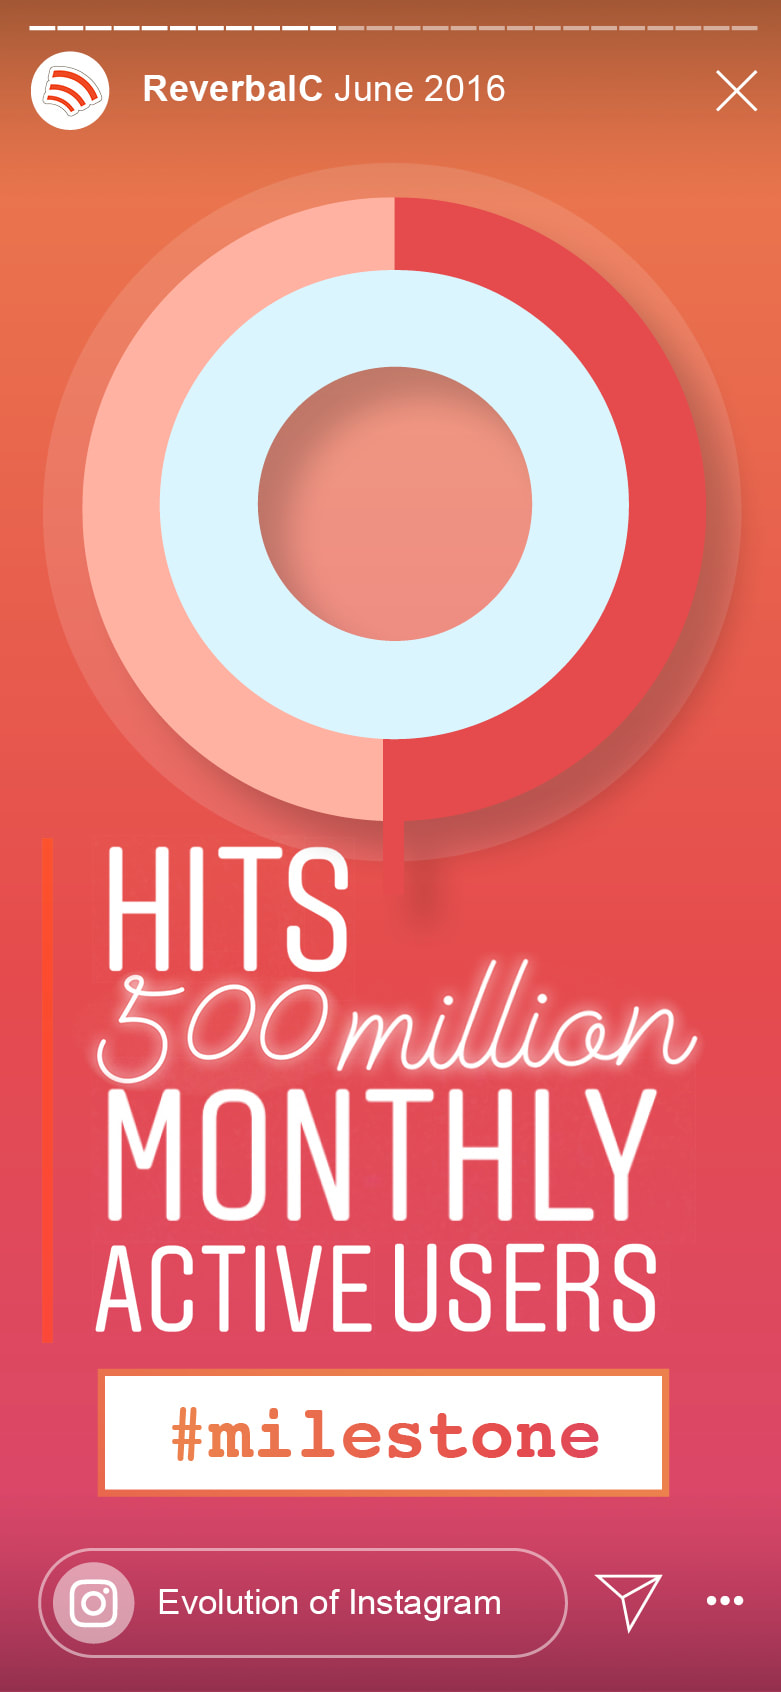 When did Instagram his 500 million active users?